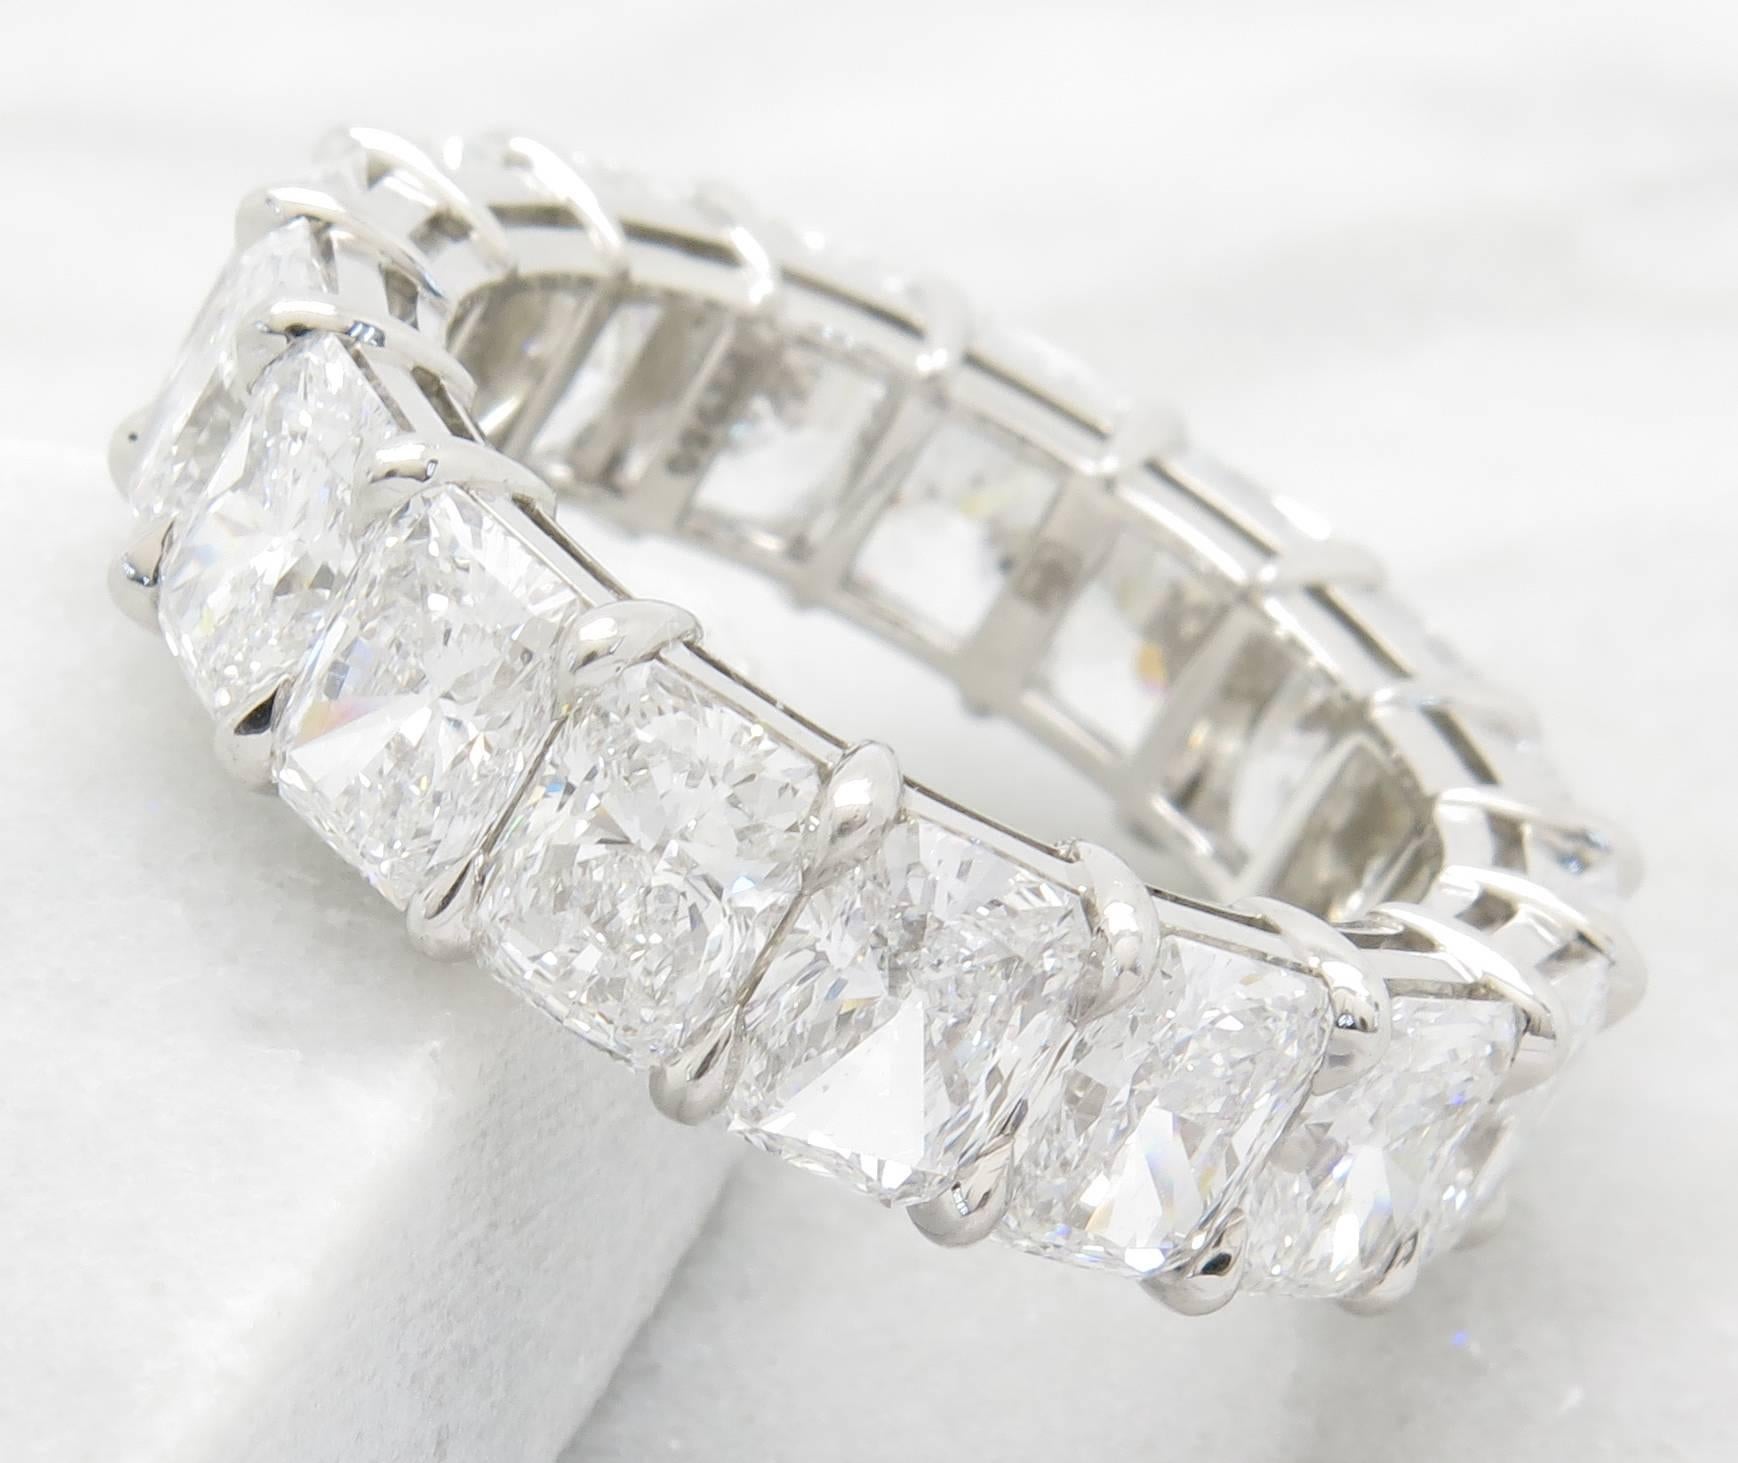 This breath-taking ring is from the world renowned designer Harry Winston. The band features 17 radiant brilliant cut diamonds weighing in total 9.35 carats. The diamonds are D-E in color (colorless) and VS1-VS2 in clarity. The diamonds are prong